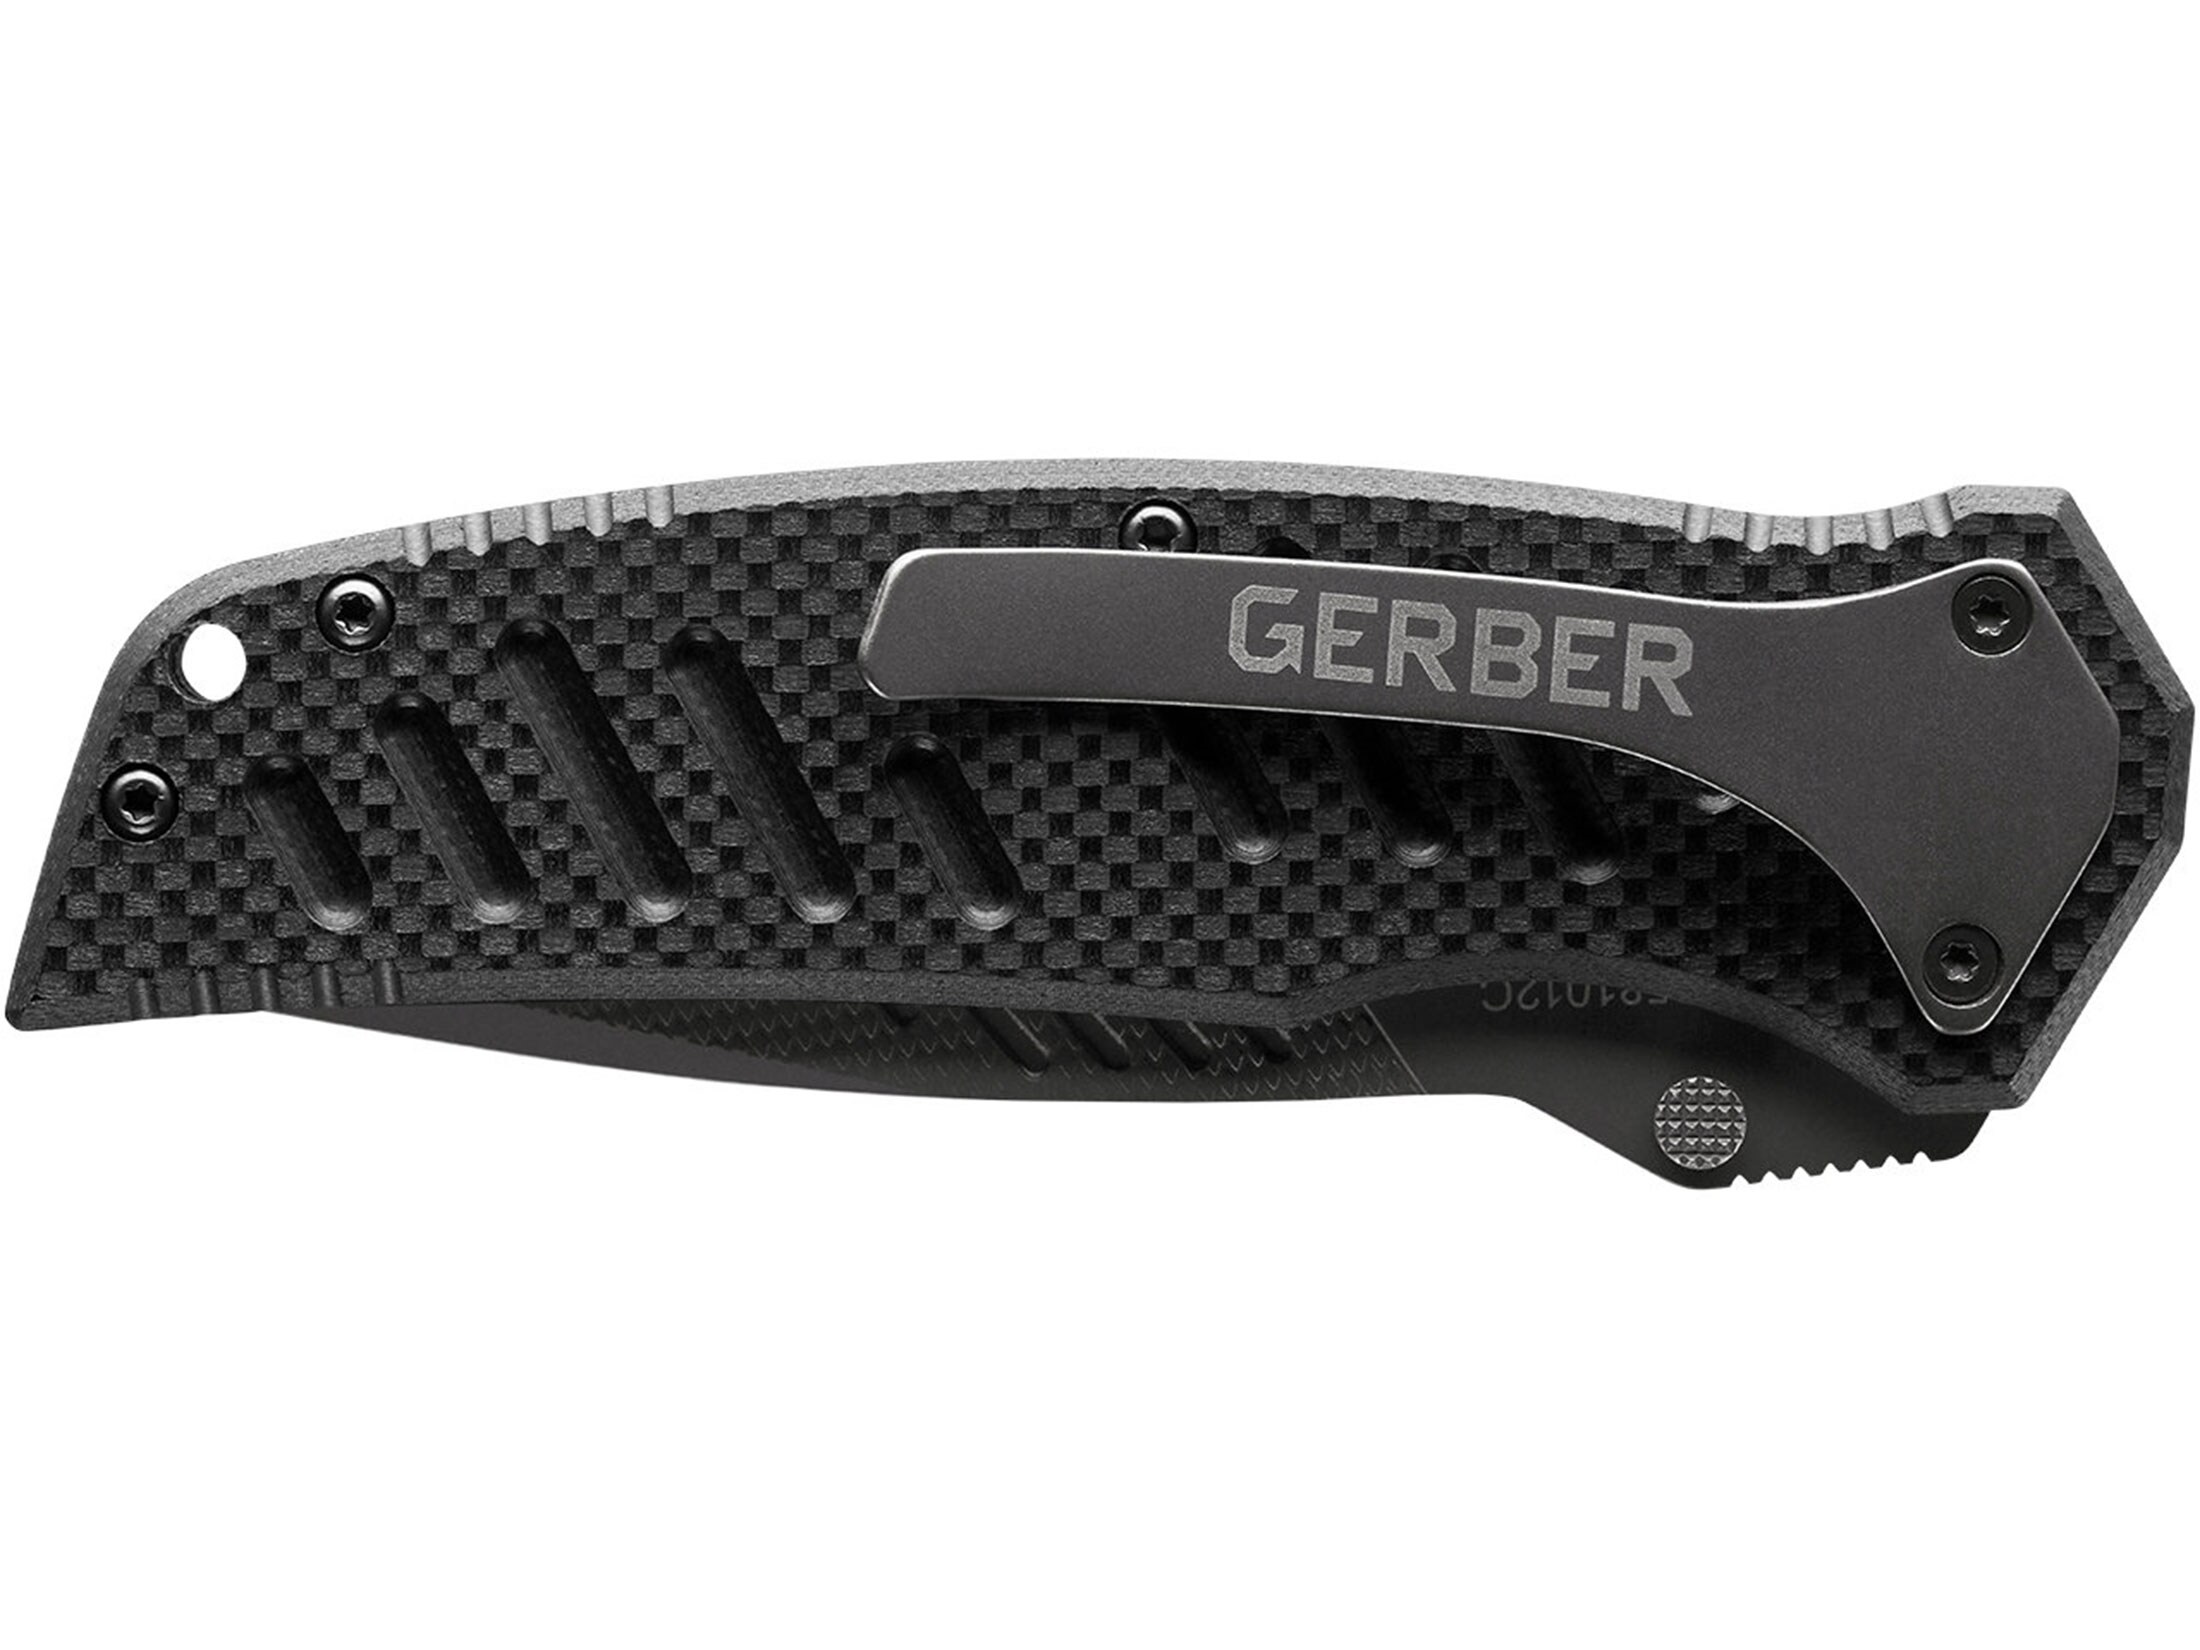 Gerber Swagger Assisted Open Folding Knife 3.25″ Black Drop Point 7Cr17MoV Stainless Steel Blade G-10 Handle Black For Sale